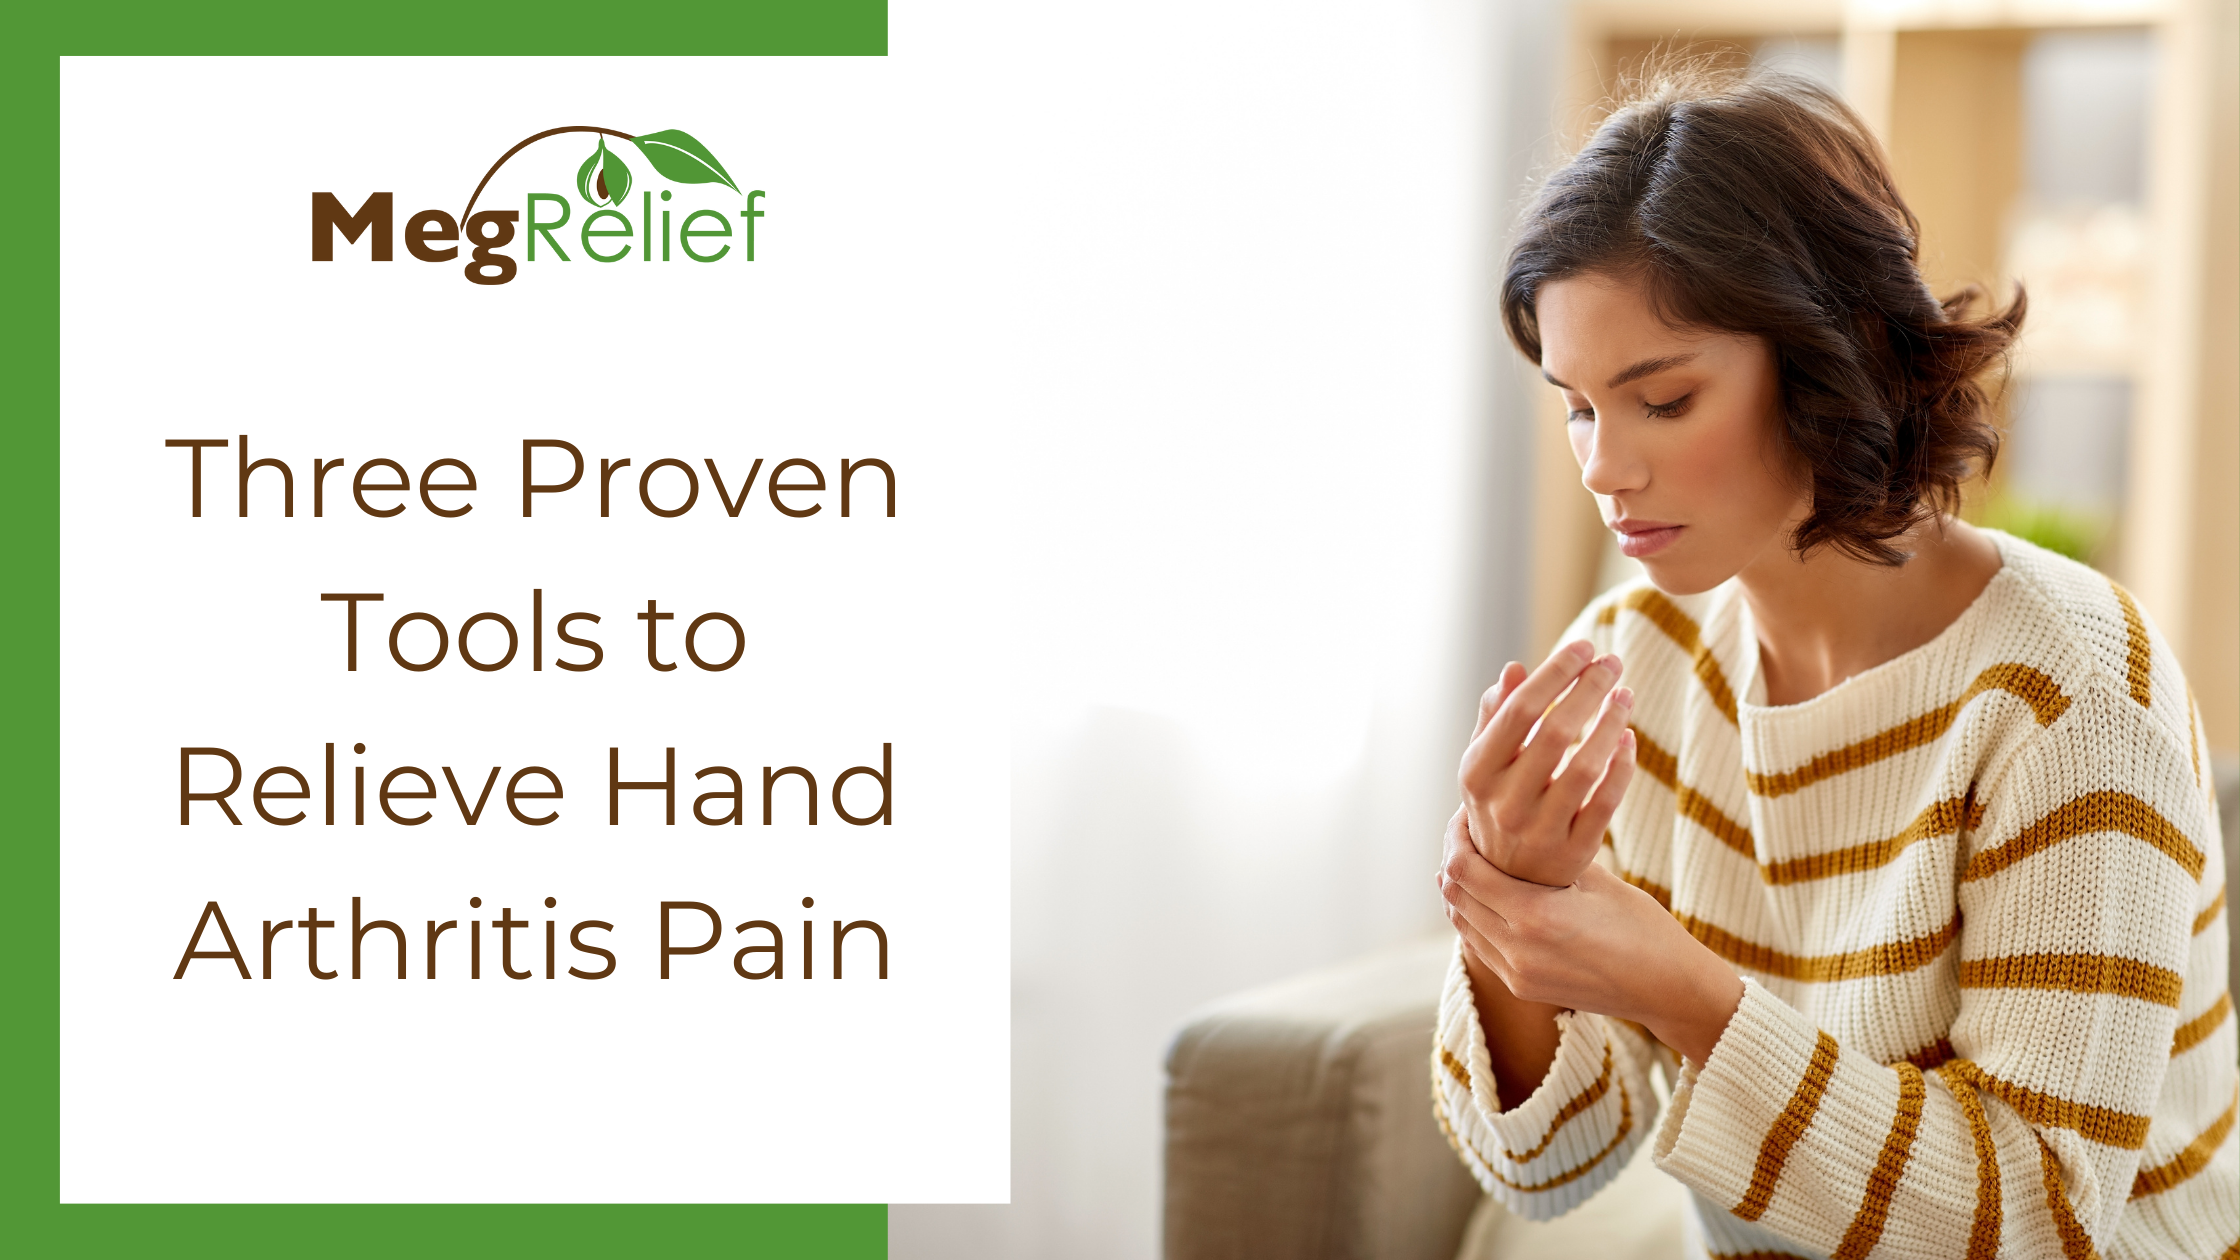 https://www.megrelief.com/wp-content/uploads/2021/09/Three-Proven-Tools-to-Relieve-Hand-Arthritis-Pain-WP.png